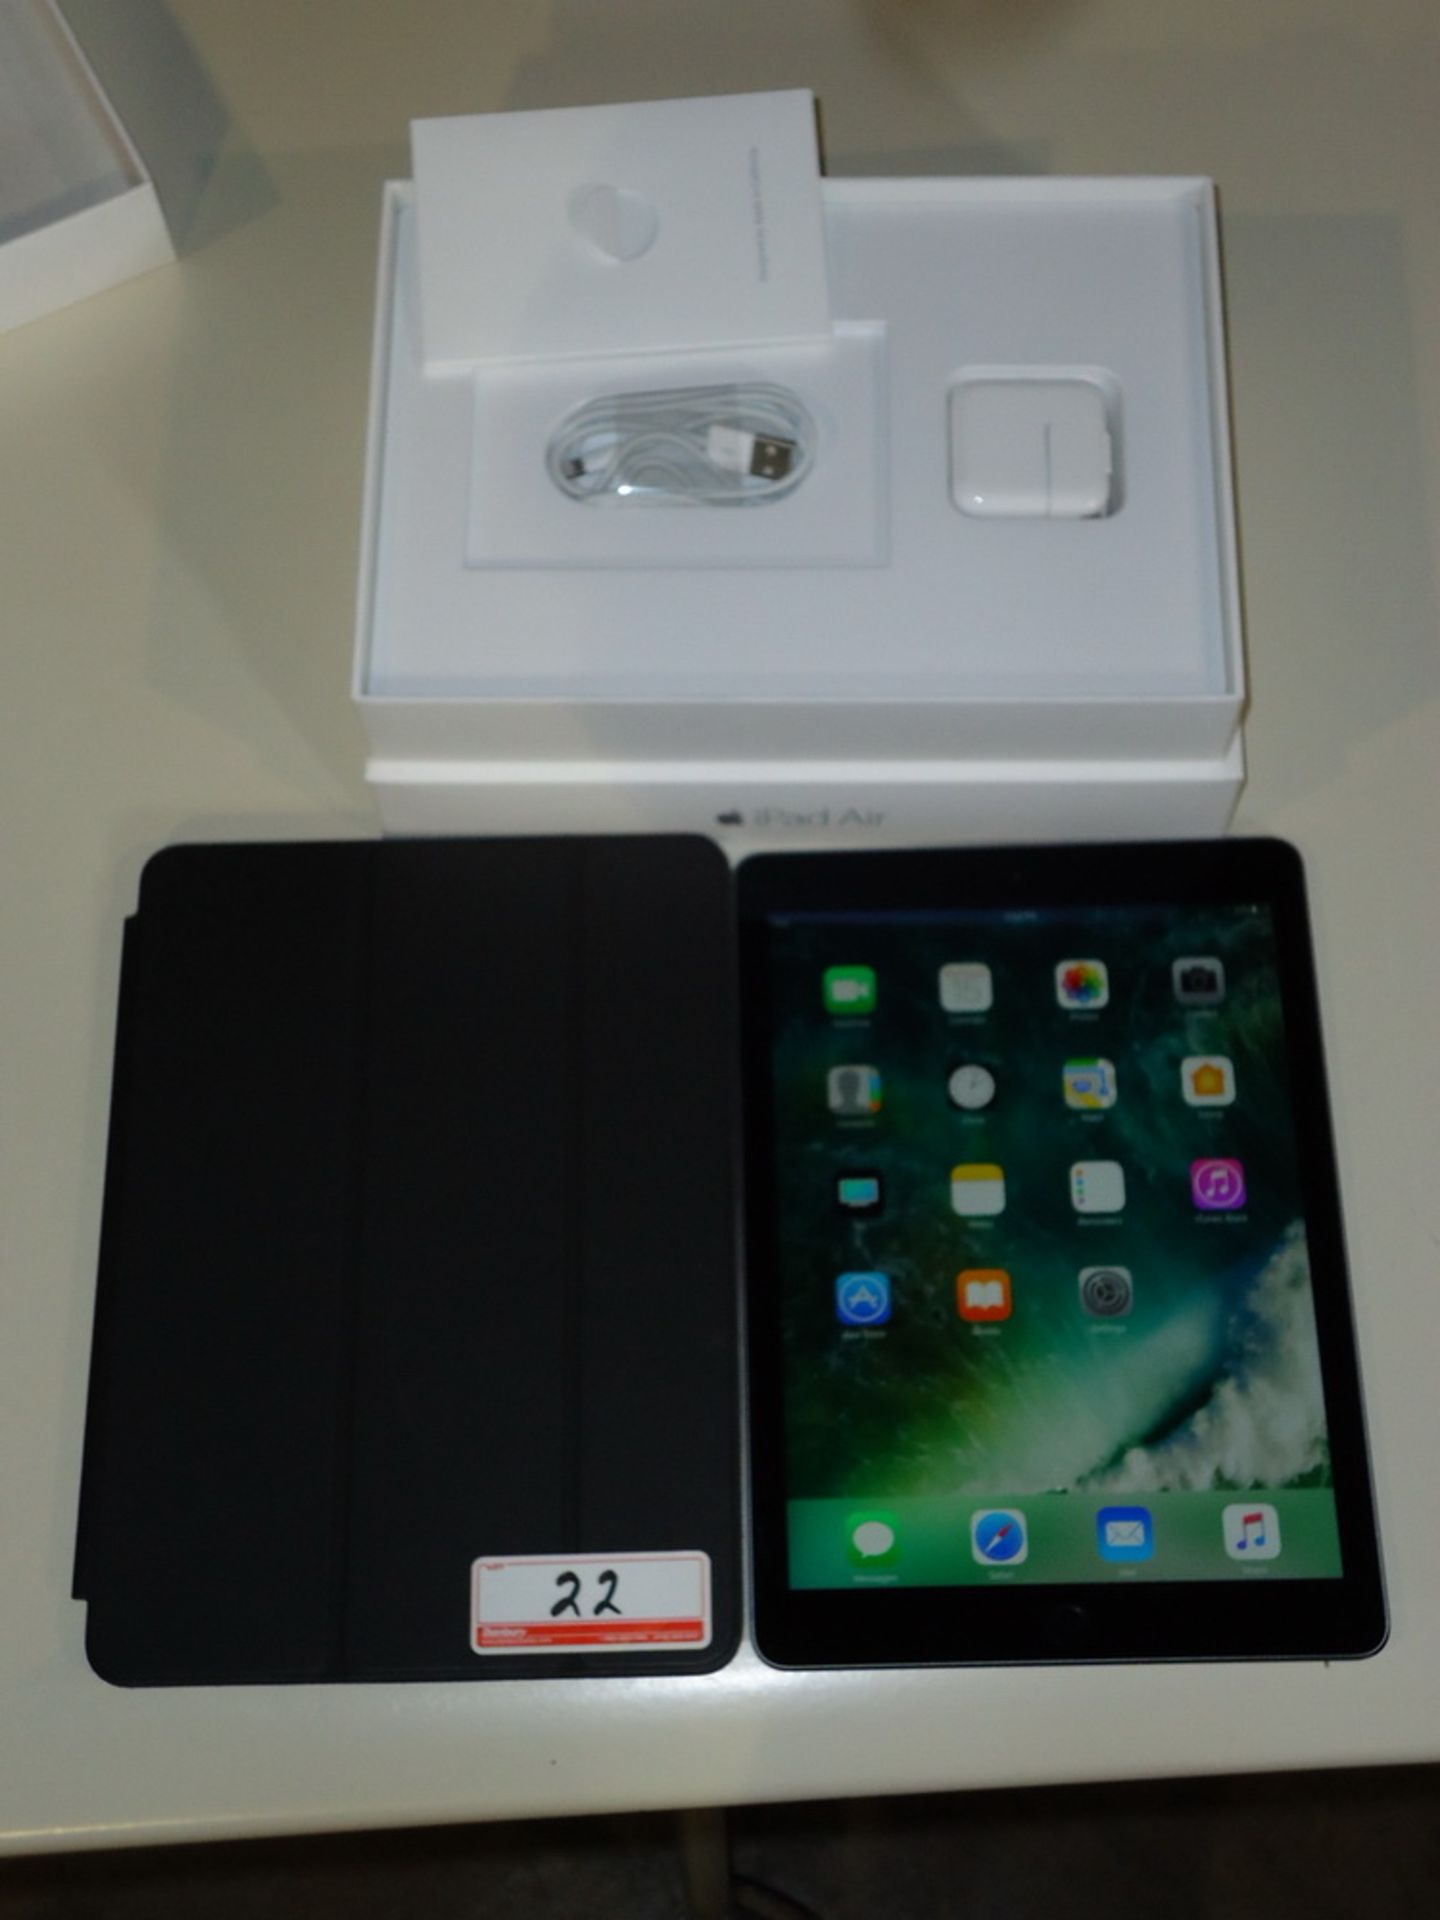 APPLE IPAD AIR 2 (MGKL2CL/A) WI-FI 64GB SPACE GRAY TABLET C/W POWER ADAPTER, CABLE, & PACKAGING, S/N